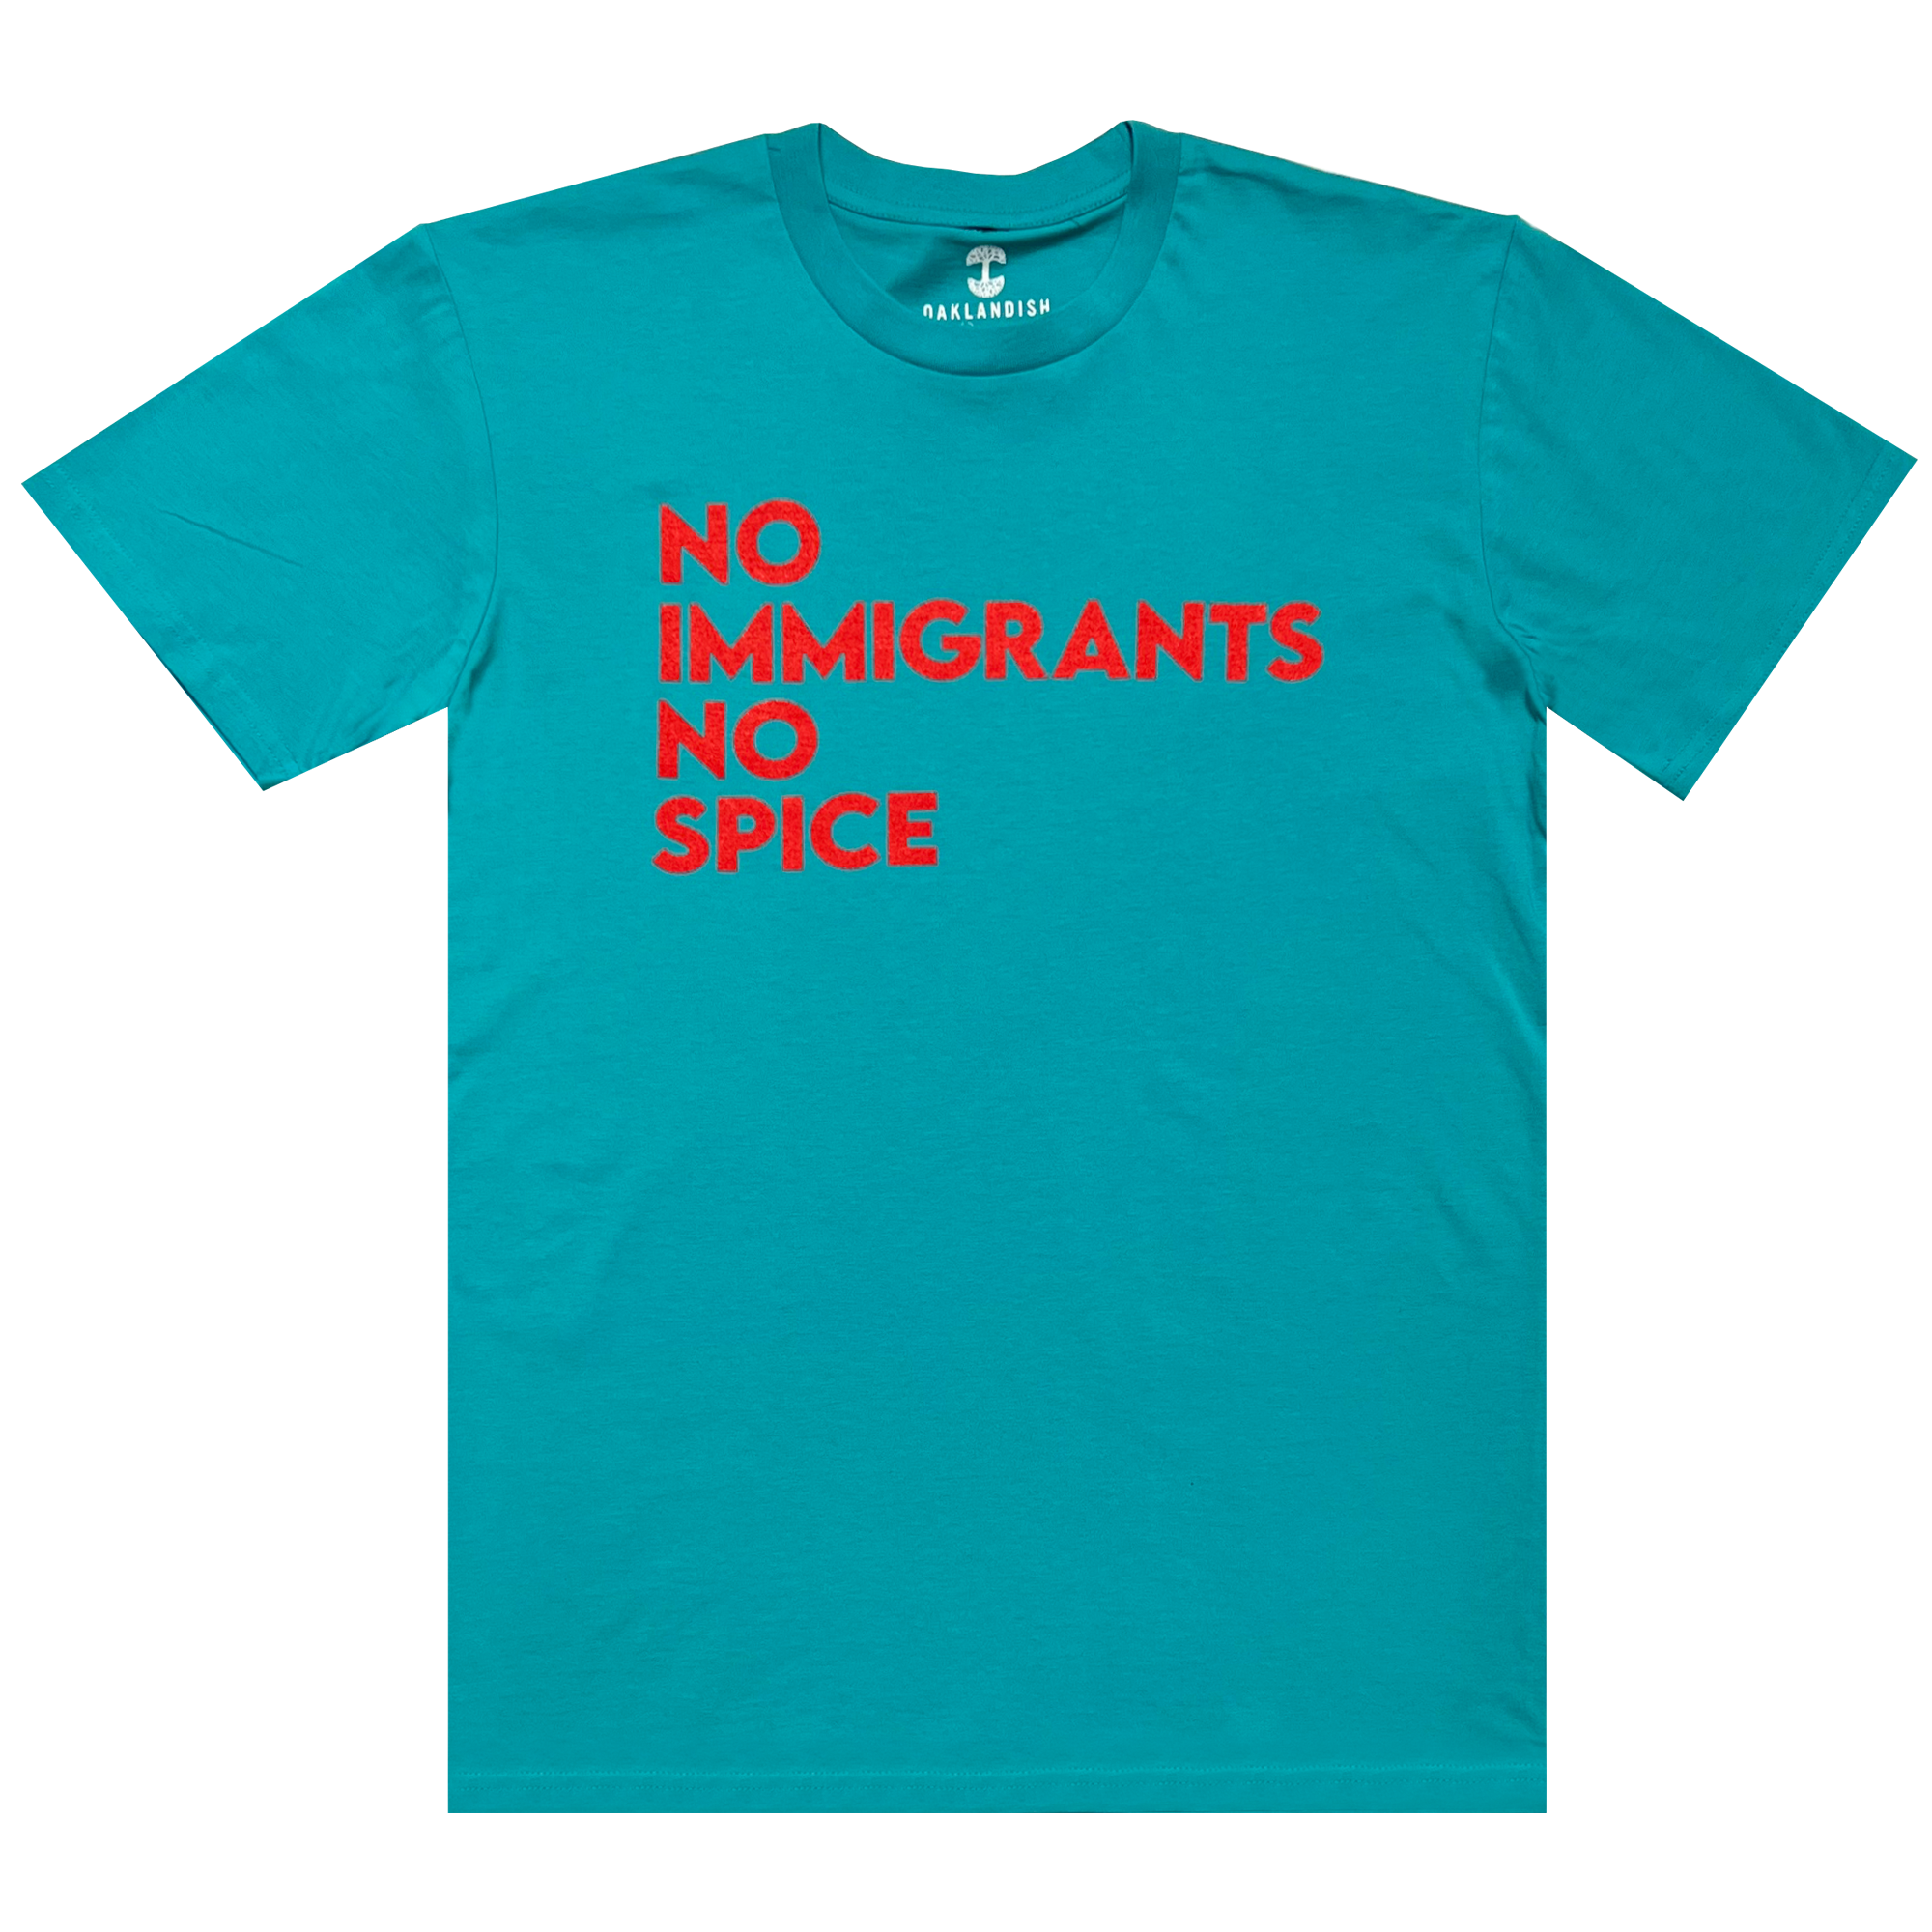 Teal t-shirt with No Immigrants No Spice wordmark printed in bright red on the front chest.